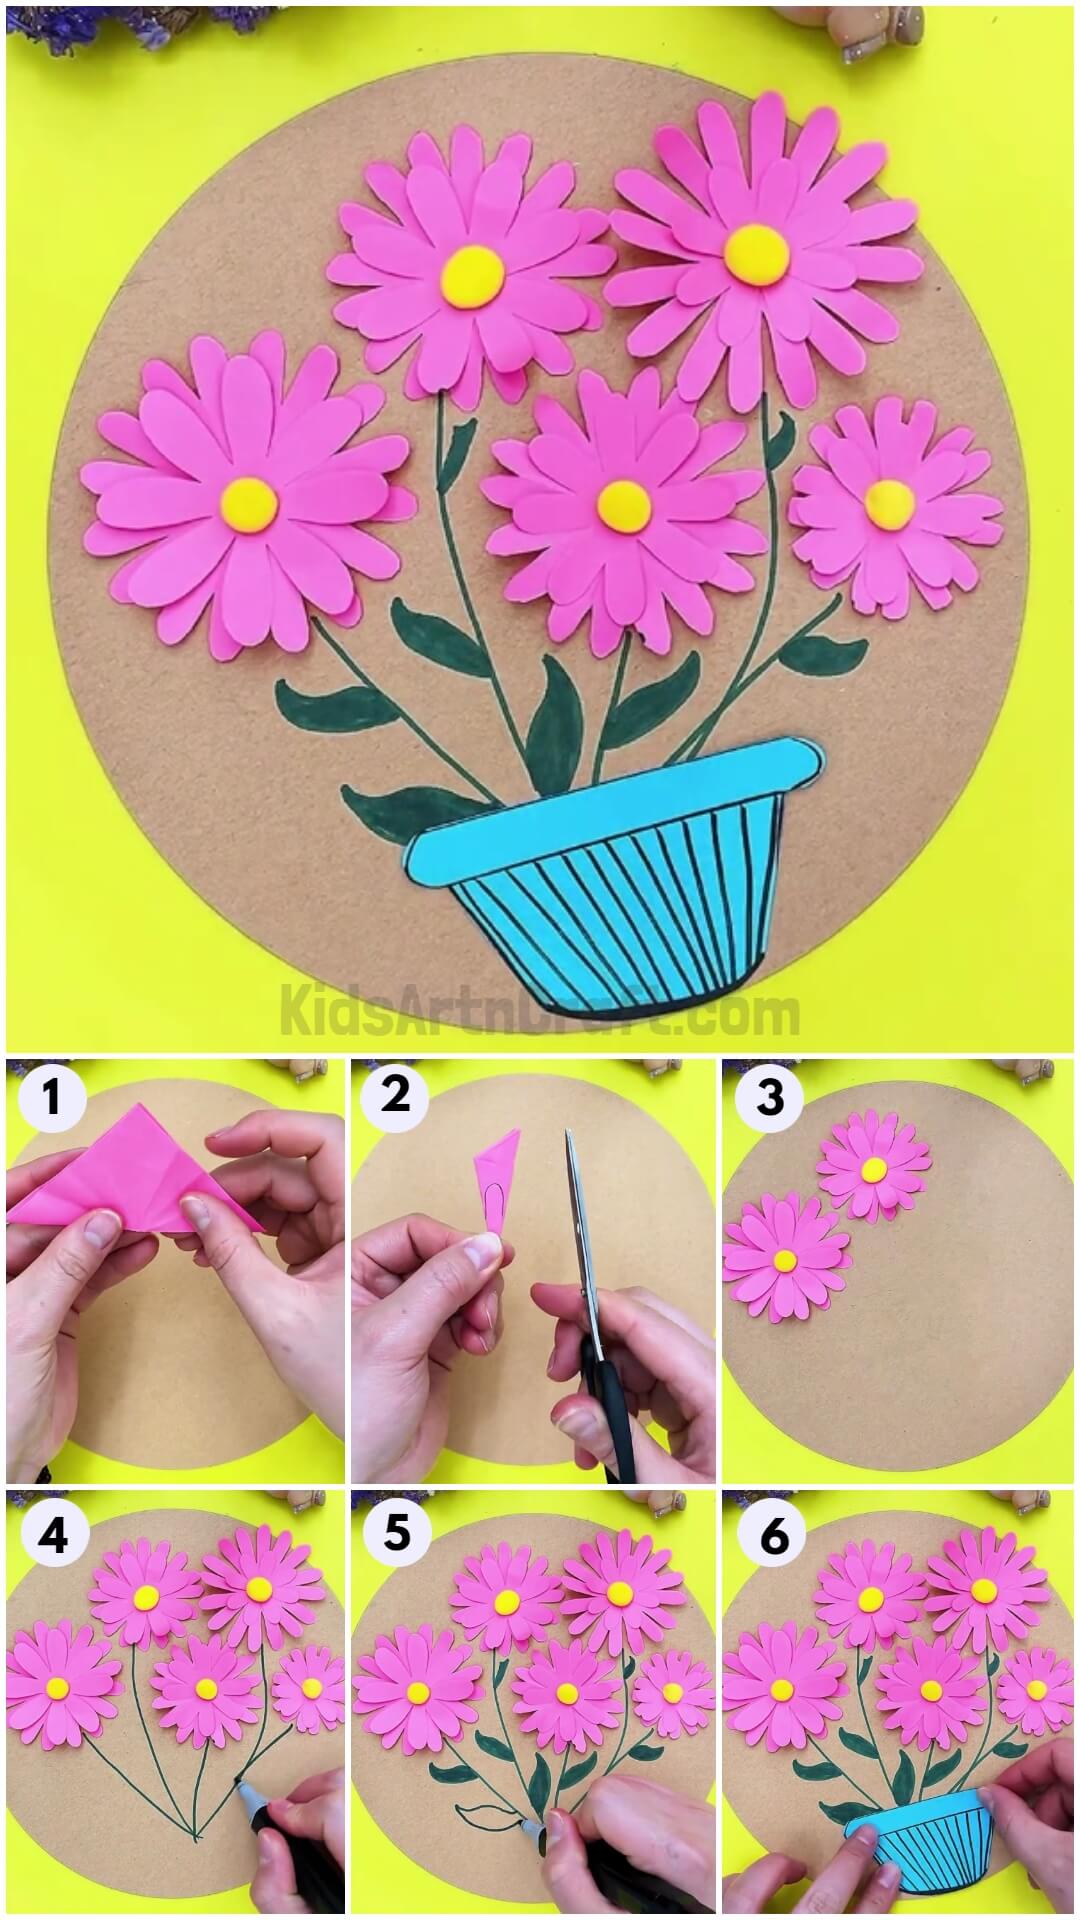 3D Flower Making Craft Step-by-step Tutorial For Kids